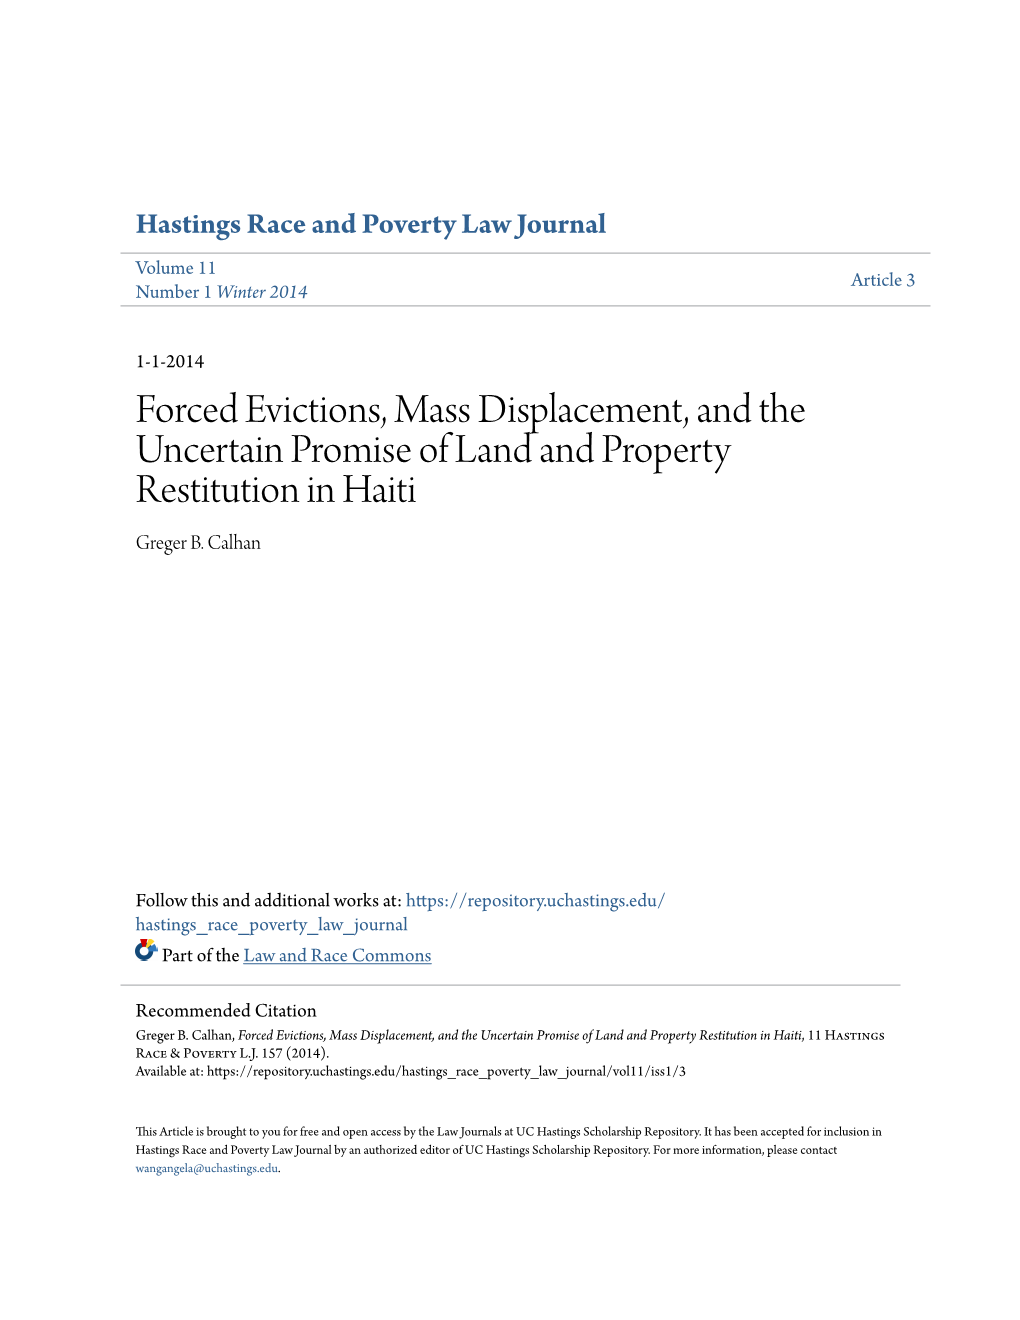 Forced Evictions, Mass Displacement, and the Uncertain Promise of Land and Property Restitution in Haiti Greger B